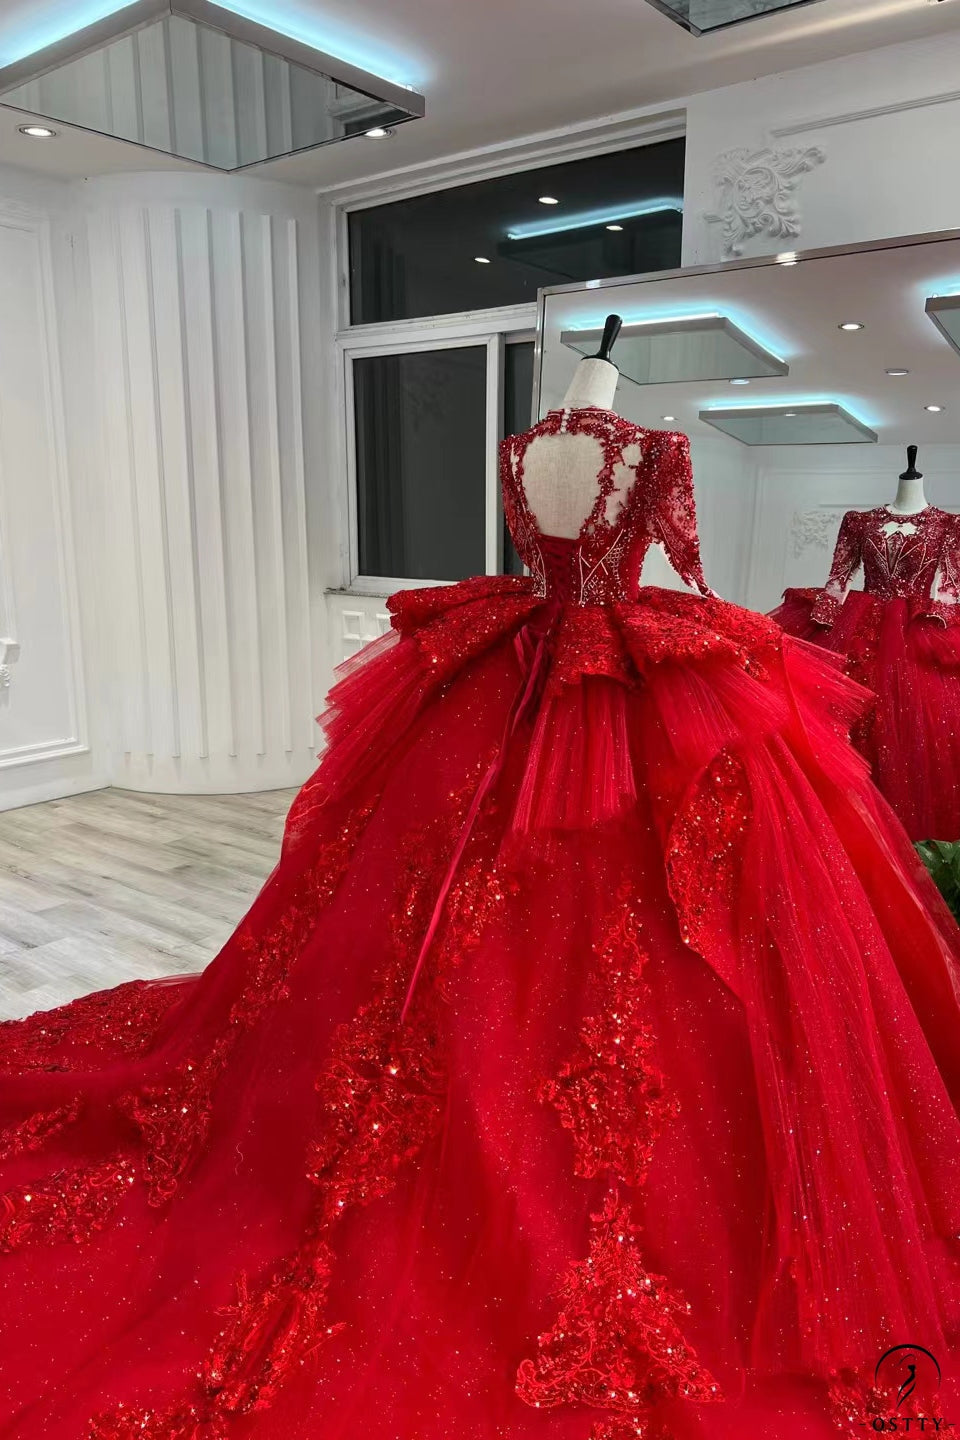 OSTTY - Red Luxury Long Sleeves Ball Gown Wedding Dress $1,499.99